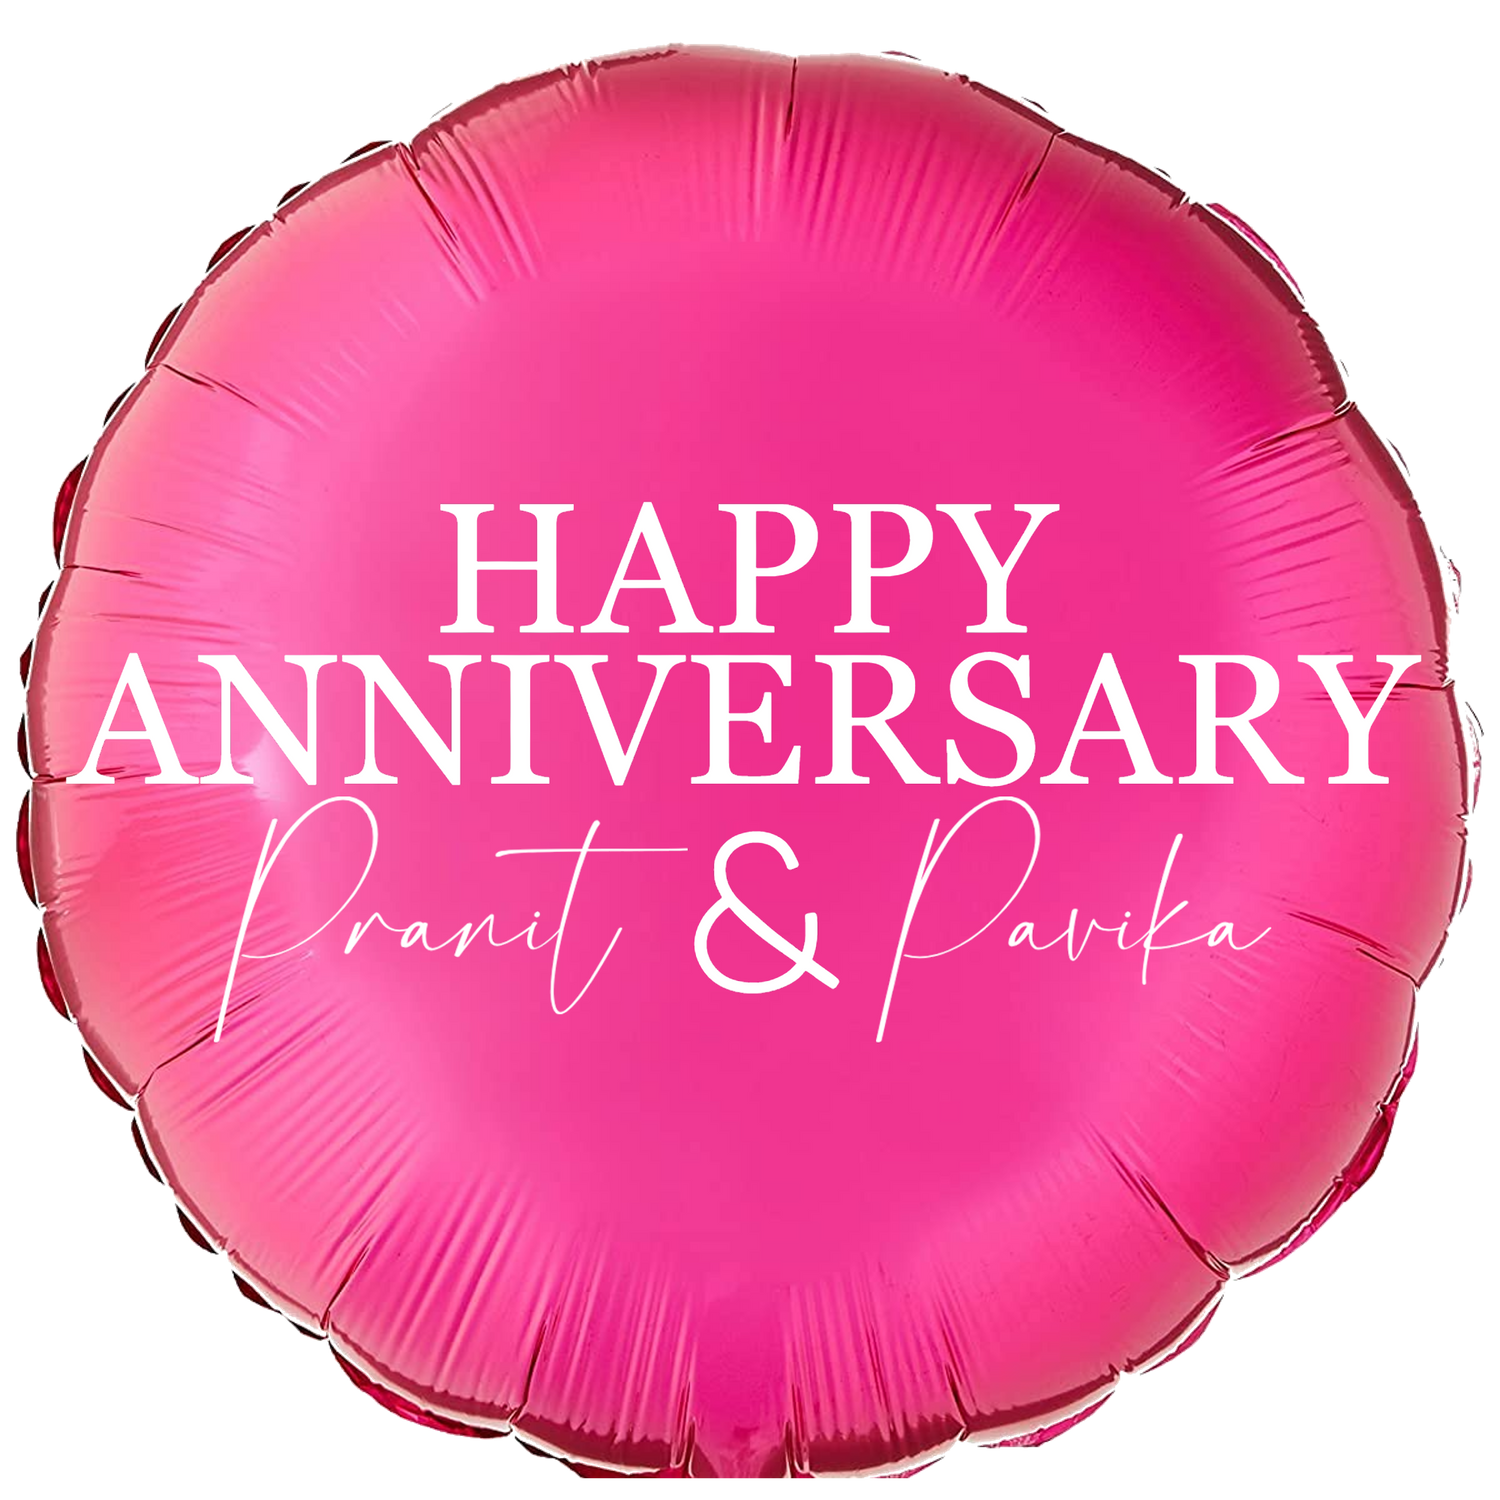 Custom Name/Text/Message Hot Pink Round Balloons For First Wedding Anniversary, 2nd/3rd/5th/10th/15th/20th/25th/30th/35th/40th/45th/50th/55th/60th/65th/75th Marriage Anniversary And Wedding Milestones. Supports Helium/Air, Luxury Bespoke Balloons Make Perfect Decoration Supplies & Surprise For Your Husband/Wife/Partner/Other-Half.